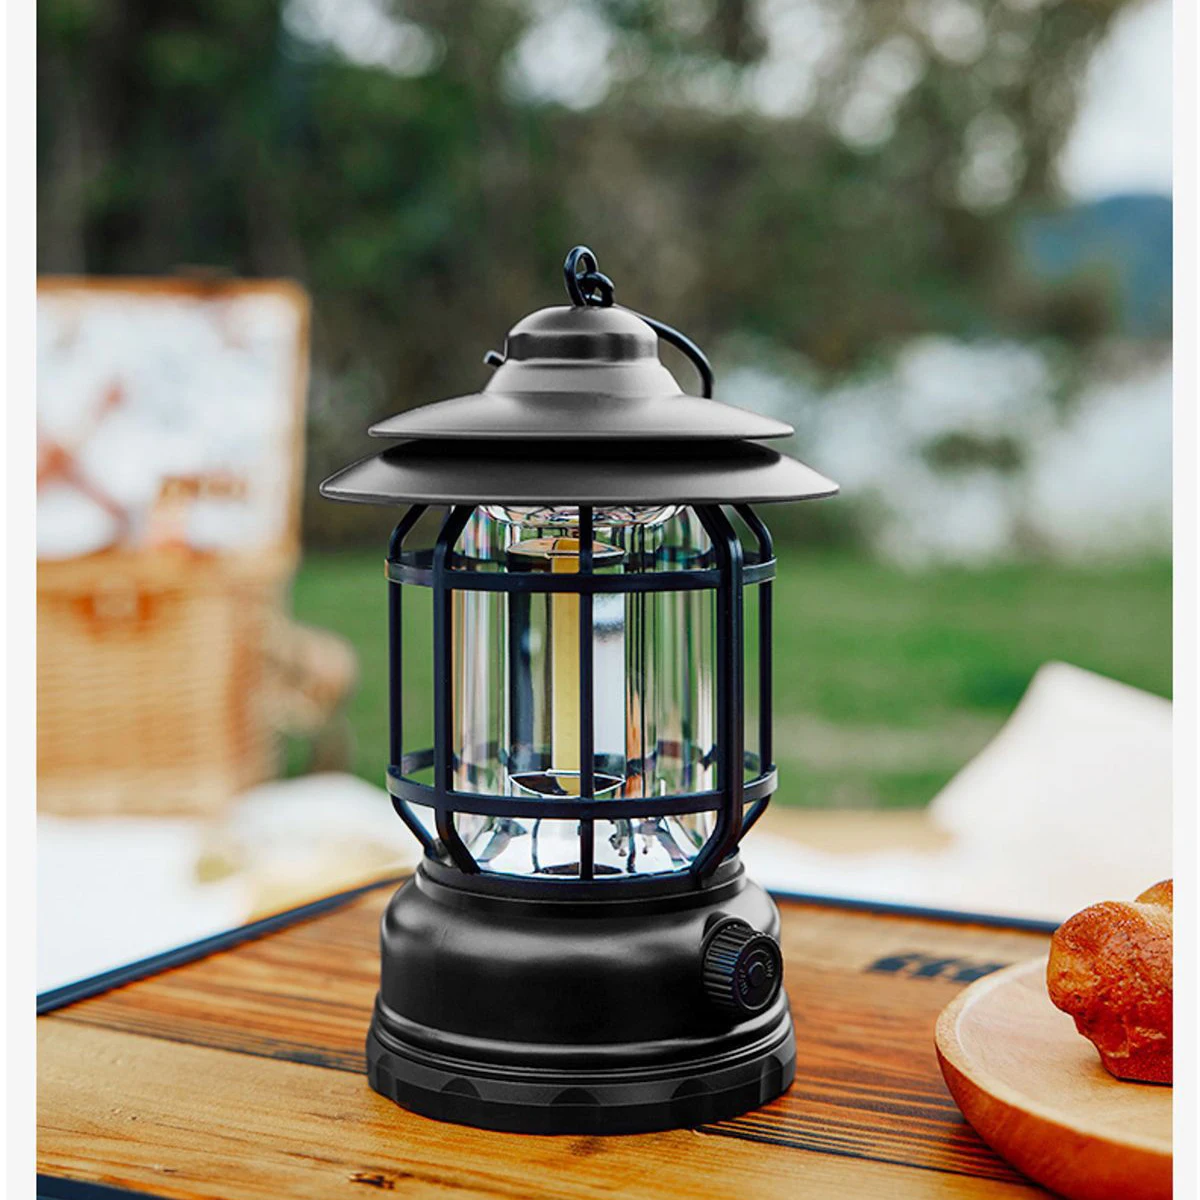 https://ae01.alicdn.com/kf/Sc7356ed019944968adf0397801154ff4n/Outdoor-Waterproof-Portable-Camping-Lantern-Retro-Atmosphere-light-Rechargeable-Hanging-Tent-light-LED-camping-lamp-Hiking.jpg